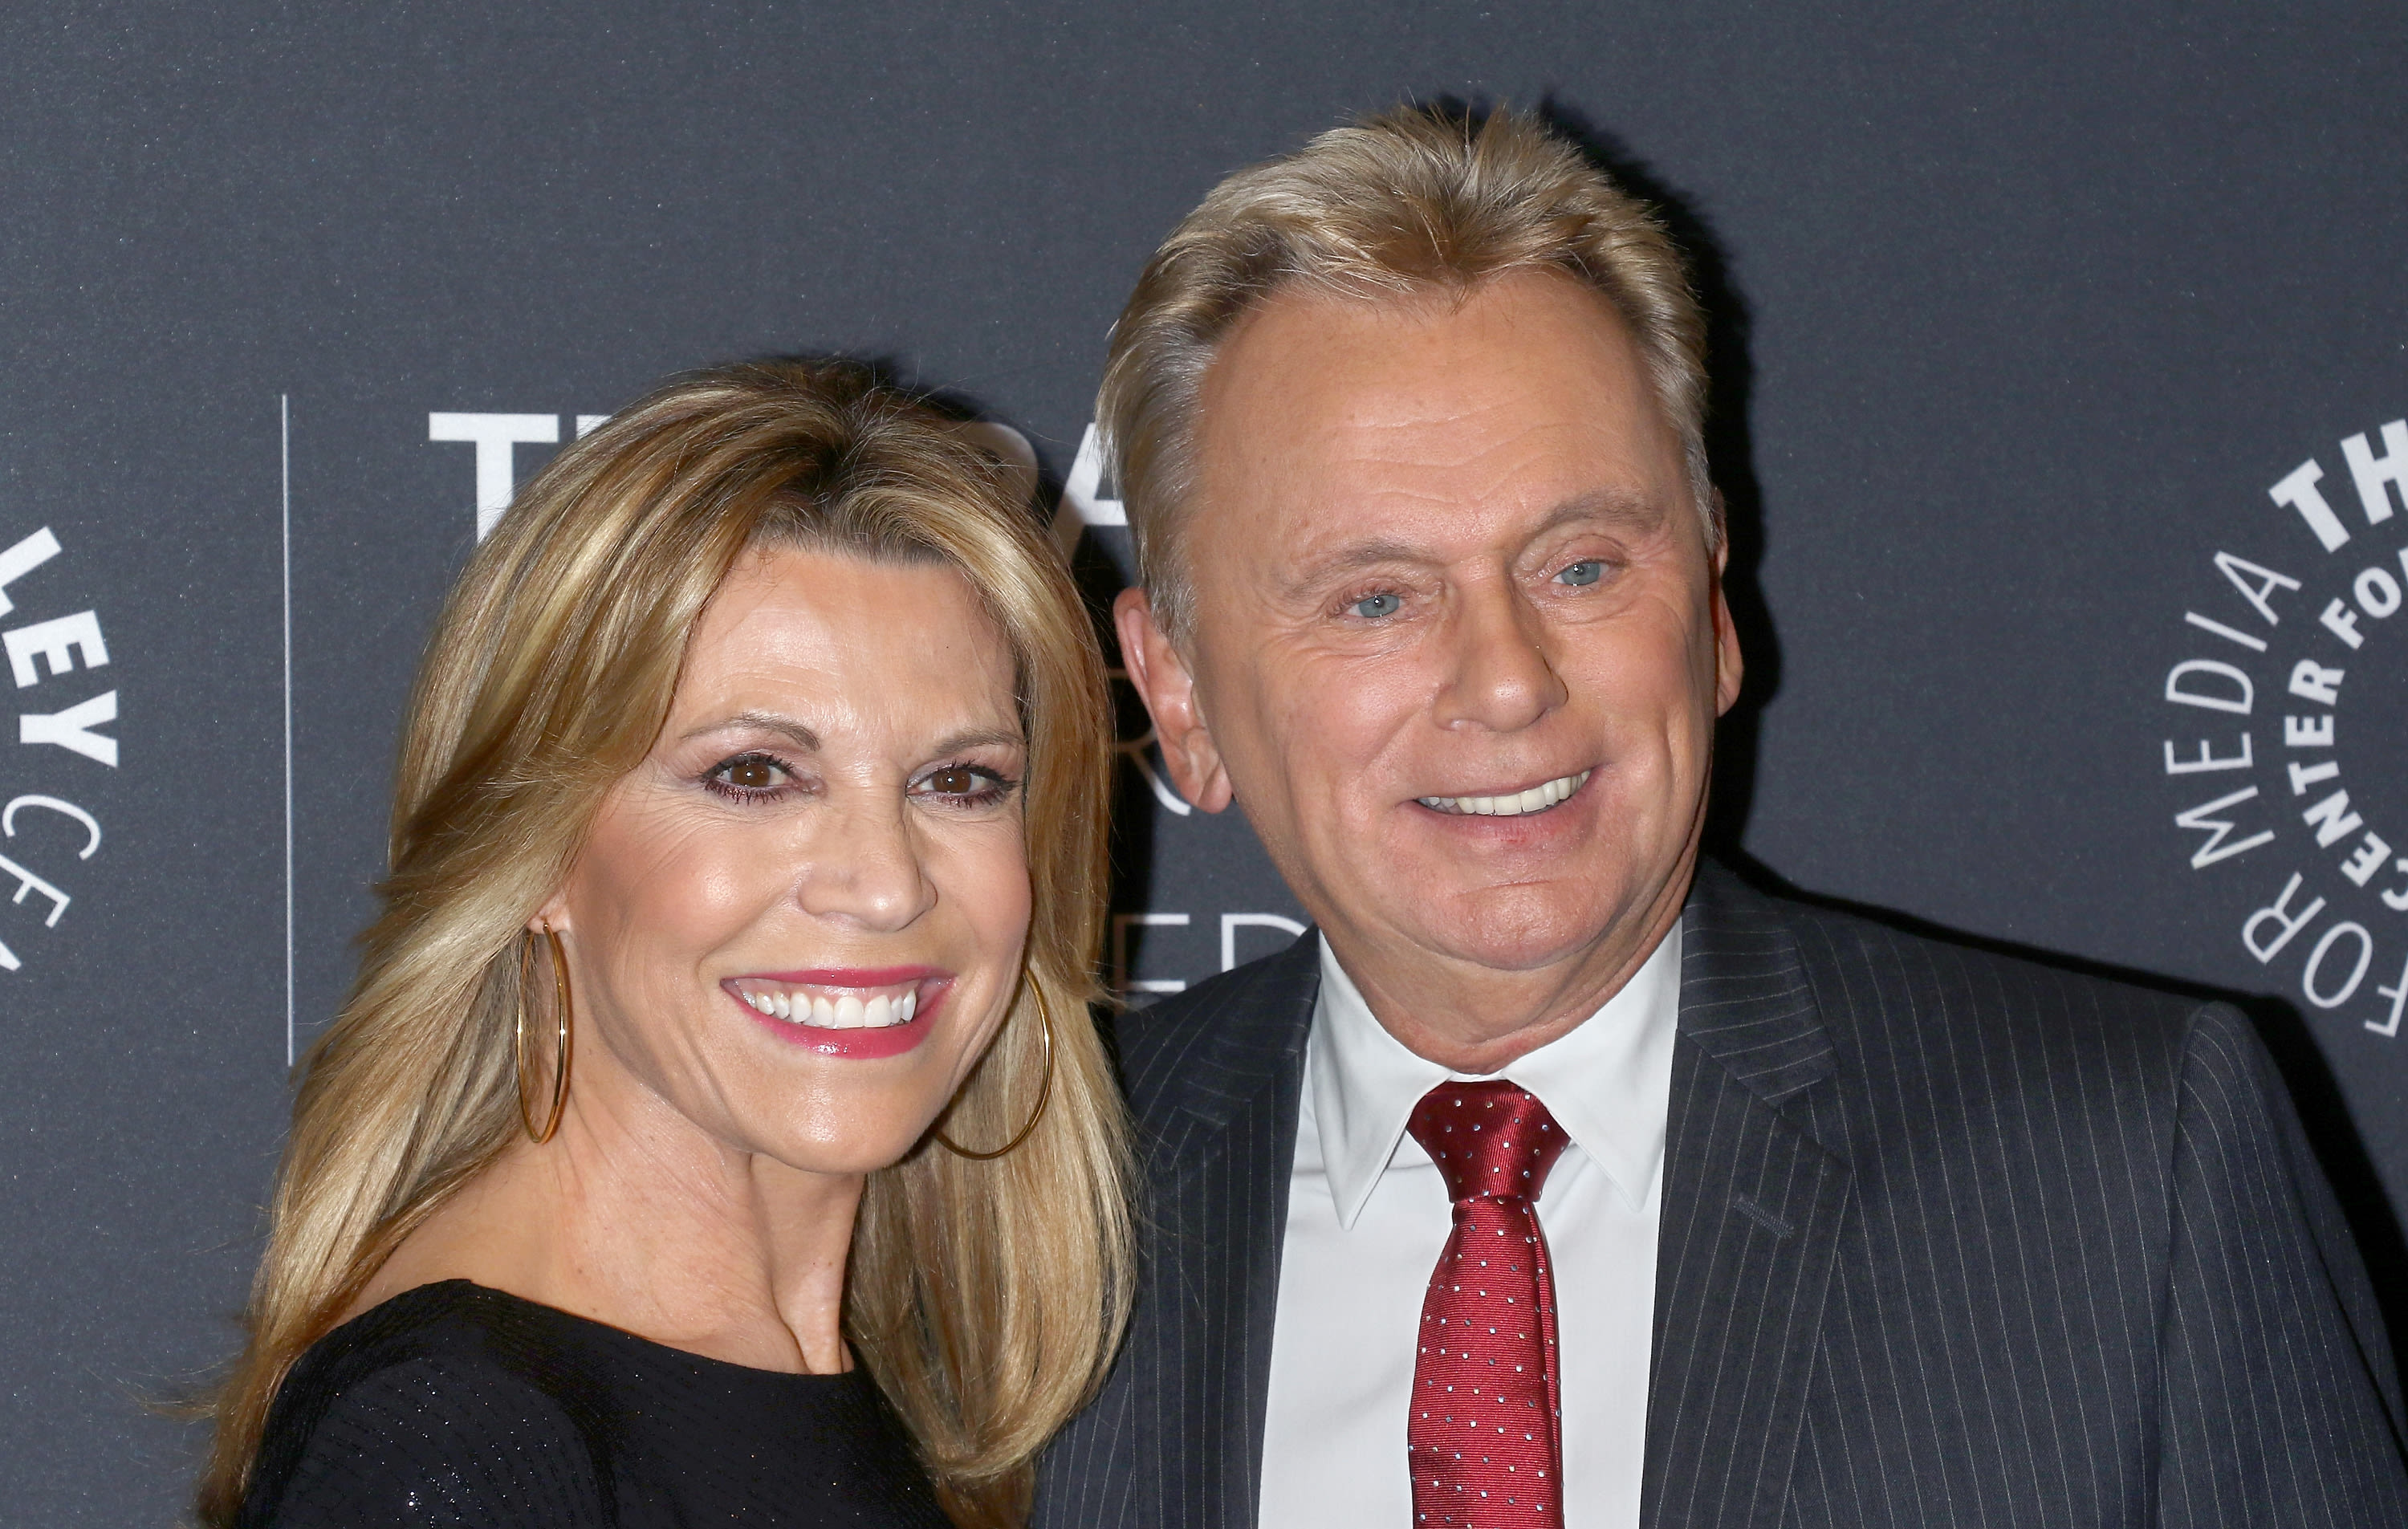 'Wheel of Fortune' continues to honor longtime host Pat Sajak